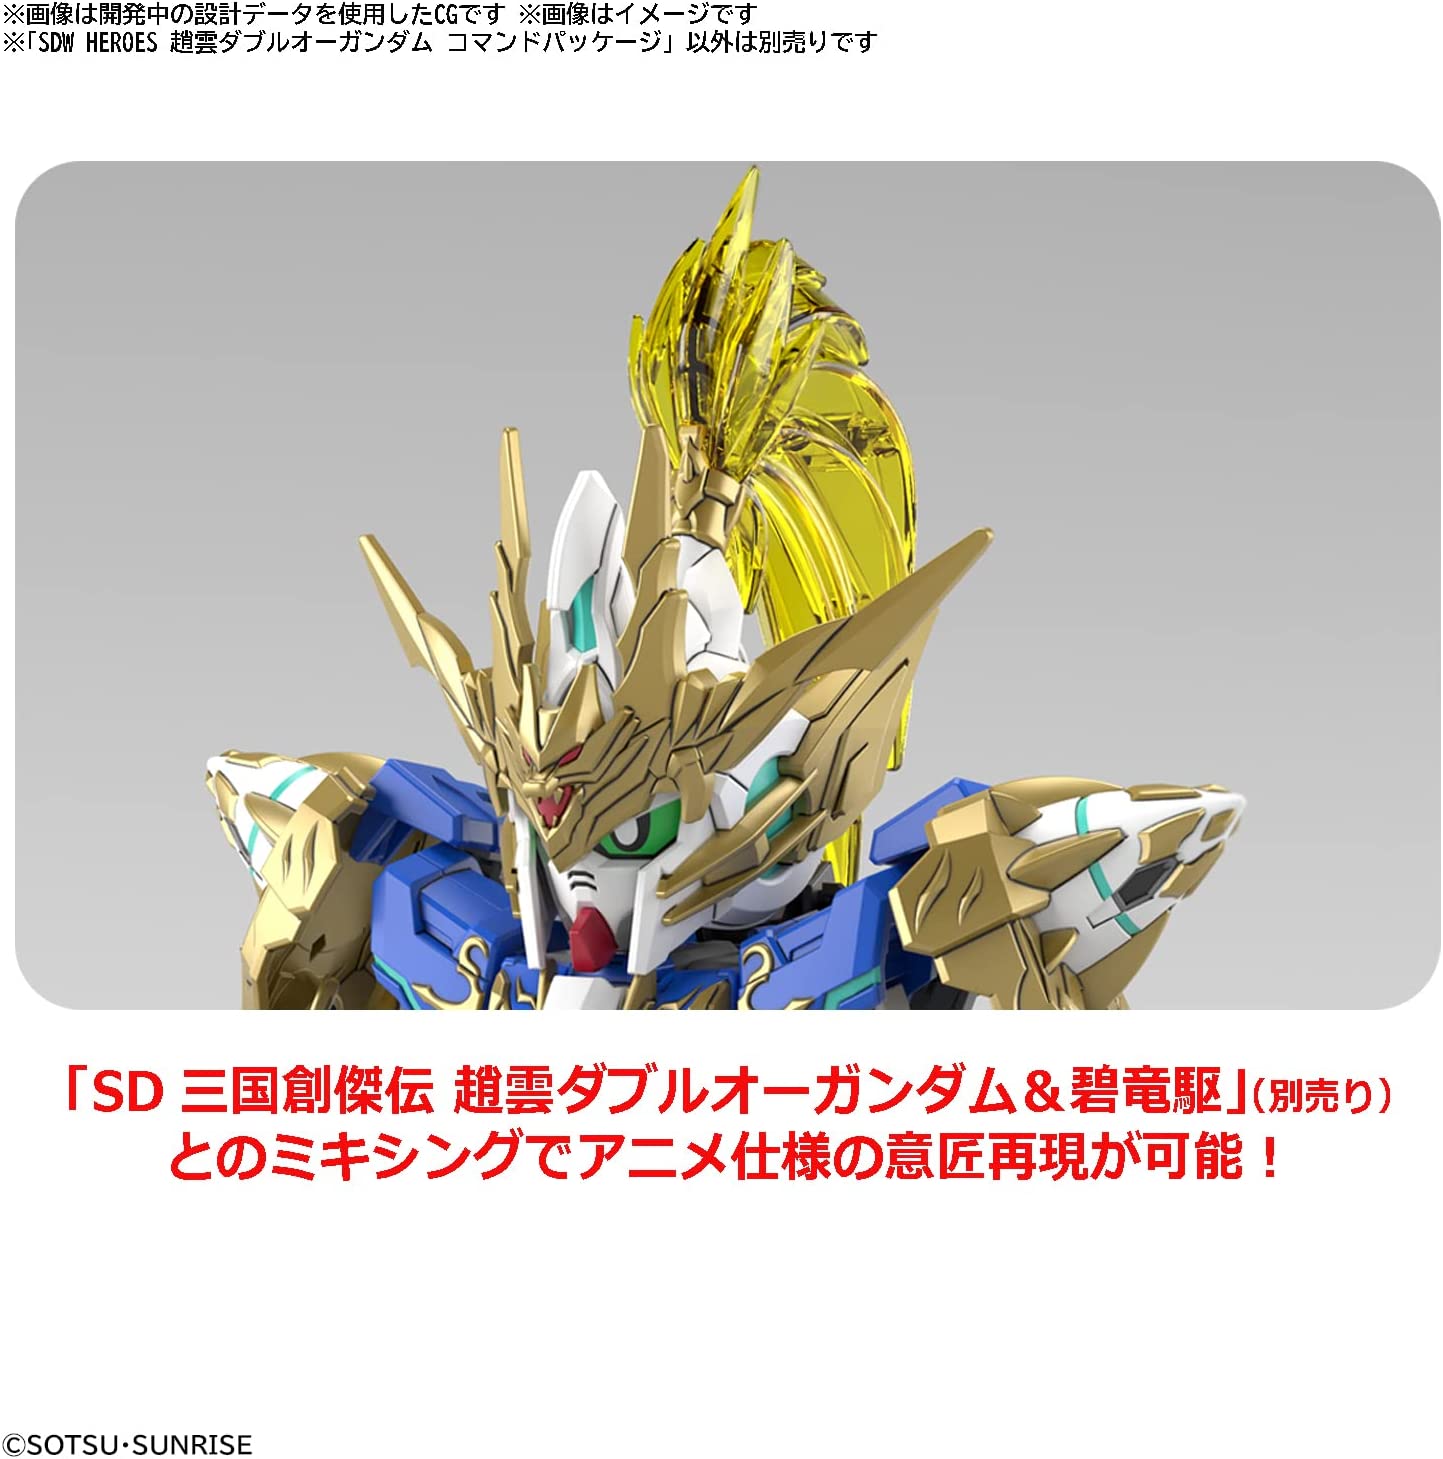 SDW HEROES Zhaoyun Double Organdam Command Package Color Coded P